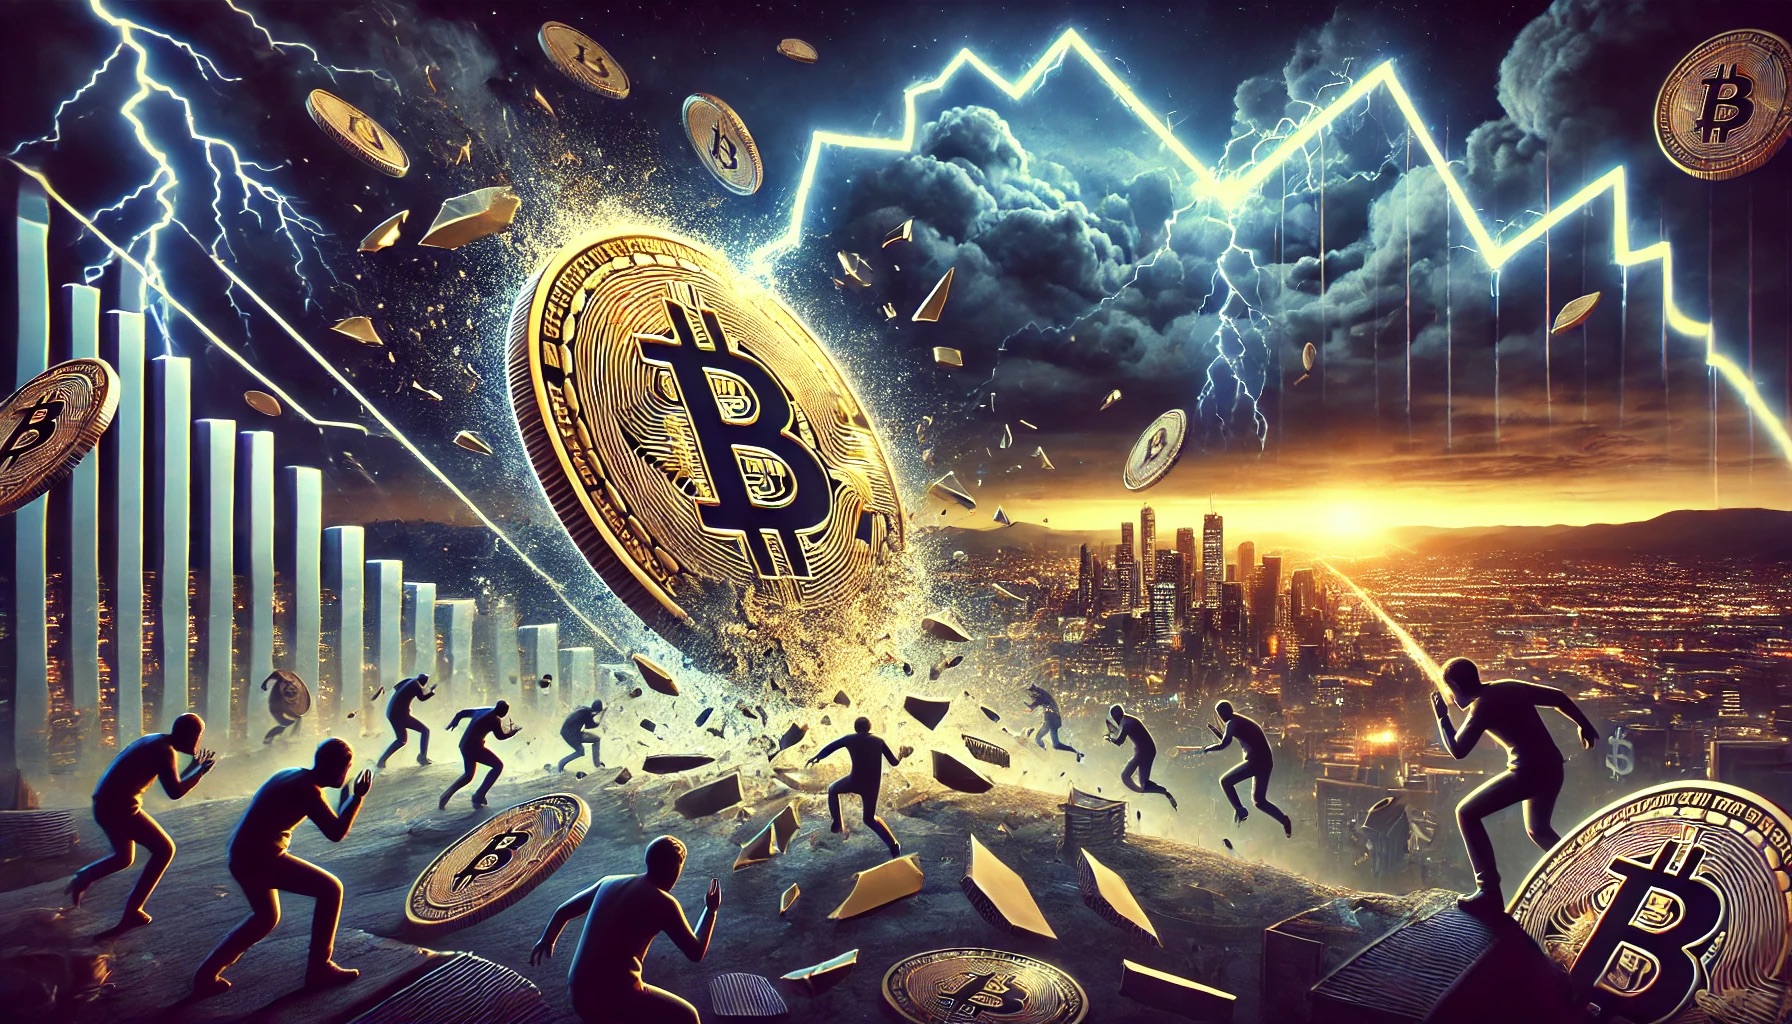 Bitcoin has been in a notable state of flux recently after recovering from the crash below $60,000 and establishing support above $61,000. However, with the pioneer cryptocurrency failing to completely beat important resistance points such as $63,500, bearish sentiment continues to dominate the market. Amid this, one crypto analyst has predicted that the Bitcoin crash is far from over, forecasting much lower figures than anticipated. Crypto Analyst Calls Out Possible Bitcoin Crash To $35,000 In a new analysis of the Bitcoin price, crypto analyst Alan Santana has predicted a possible price crash in the near future. The analysis, which was posted on the TradingView website, takes into account the past performances of the cryptocurrency, identifying various points such as a maximum pain point. Related Reading: SEC Serves Fresh Lawsuit To Metamask Developer Consensys – What’s The Problem This Time? Santana points out that for Bitcoin, the maximum pain point currently lies between the 0.618 and 0.786 Fibonacci retracement levels. This means that the Bitcoin price has far from bottomed, going by this analysis. Since the Fibonacci retracement levels are still so low currently. Based on this, the crypto analyst believes that the price will continue to crash with the maximum pain point sitting around $34,900 and $42,855. Going by this prediction, it means that the Bitcoin price could crash as high as 45% from its current level if it does play out. Interestingly, despite expecting such a massive price crash, the crypto analyst does not believe that the price will fall further. In fact, he points out that the Bitcoin price will never fall below the $30,000 price level ever again. Closing the analysis with some words for investors and traders, the crypto analyst advises, “Update your numbers, update your trades, update everything. These are the new numbers.” Not Everyone Is Bearish While Alan Santana’s prediction is very bearish for the Bitcoin price, not all analysts have gone the negative route. In fact, with the 20% BTC price crash, some crypto analysts believe that the worst is already over and that the pioneer cryptocurrency will see a bounce soon. Related Reading: XRP Price On The Verge Of Breaking Falling Wedge That Could Lead To 4% Increase One of the crypto analysts who predicts a bounce in the price is Doctor Bitcoin, who also posted his analysis on the TradingView website. According to the crypto analyst, this is actually the time buy BTC due to a harmonic pattern that has appeared in the chart, which points to a bullish reversal pattern. For the target, Doctor Bitcoin has predicted a possible rise to $85,000, which would be around a 35% move from the current price point. At the time of writing, the Bitcoin price is trending at $62,800, showing a 2.26% increase in the last 24 hours. Featured image created with Dall.E, chart from Tradingview.com